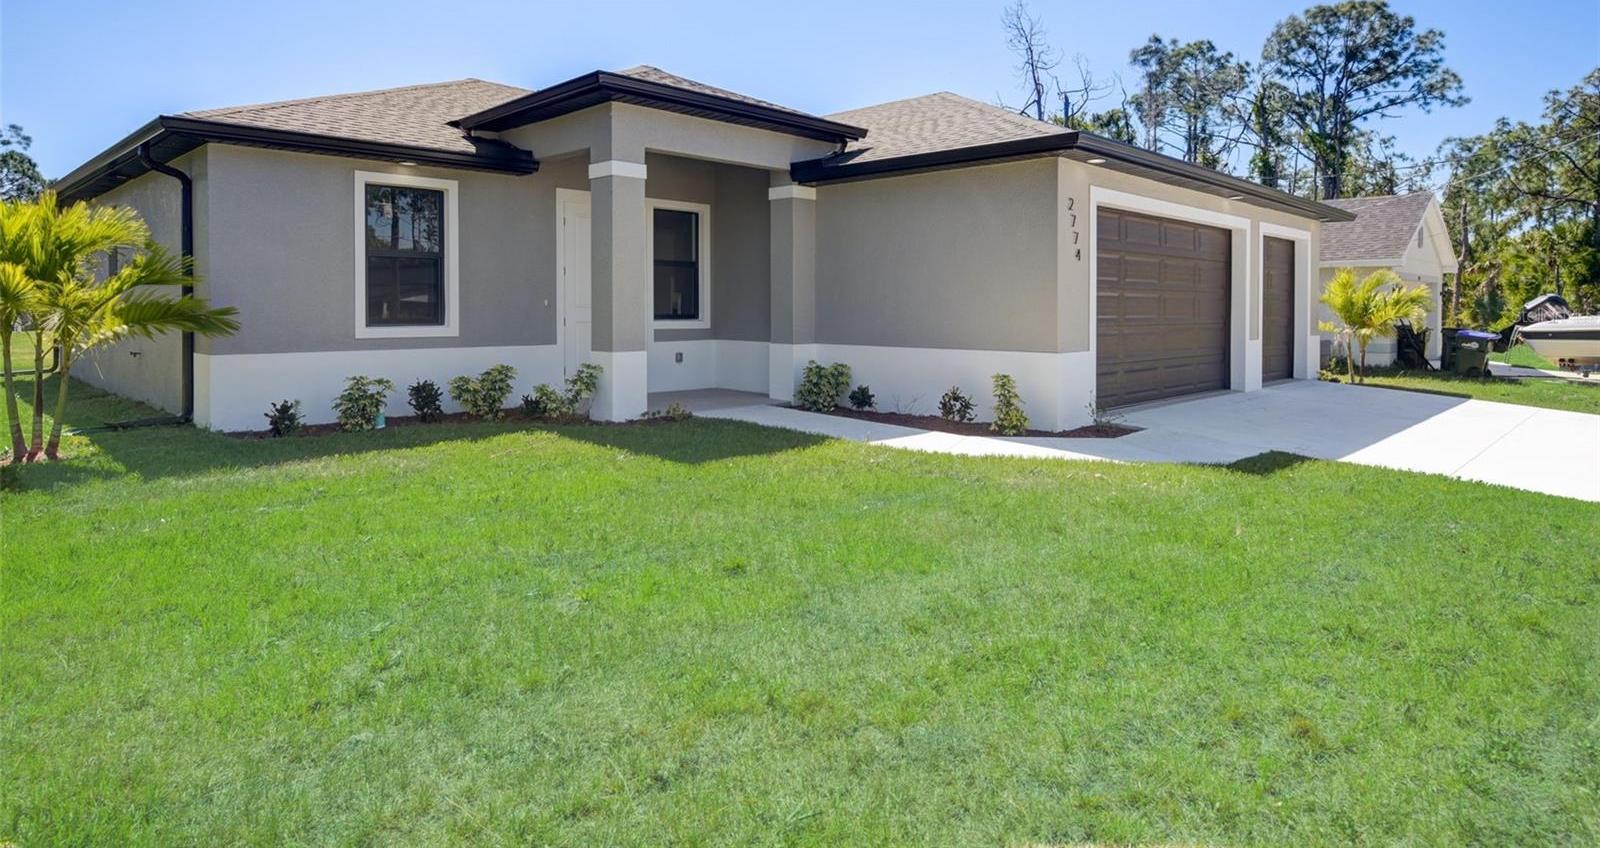 Photo one of 2774 Jeannin Dr North Port FL 34288 | MLS A4607118